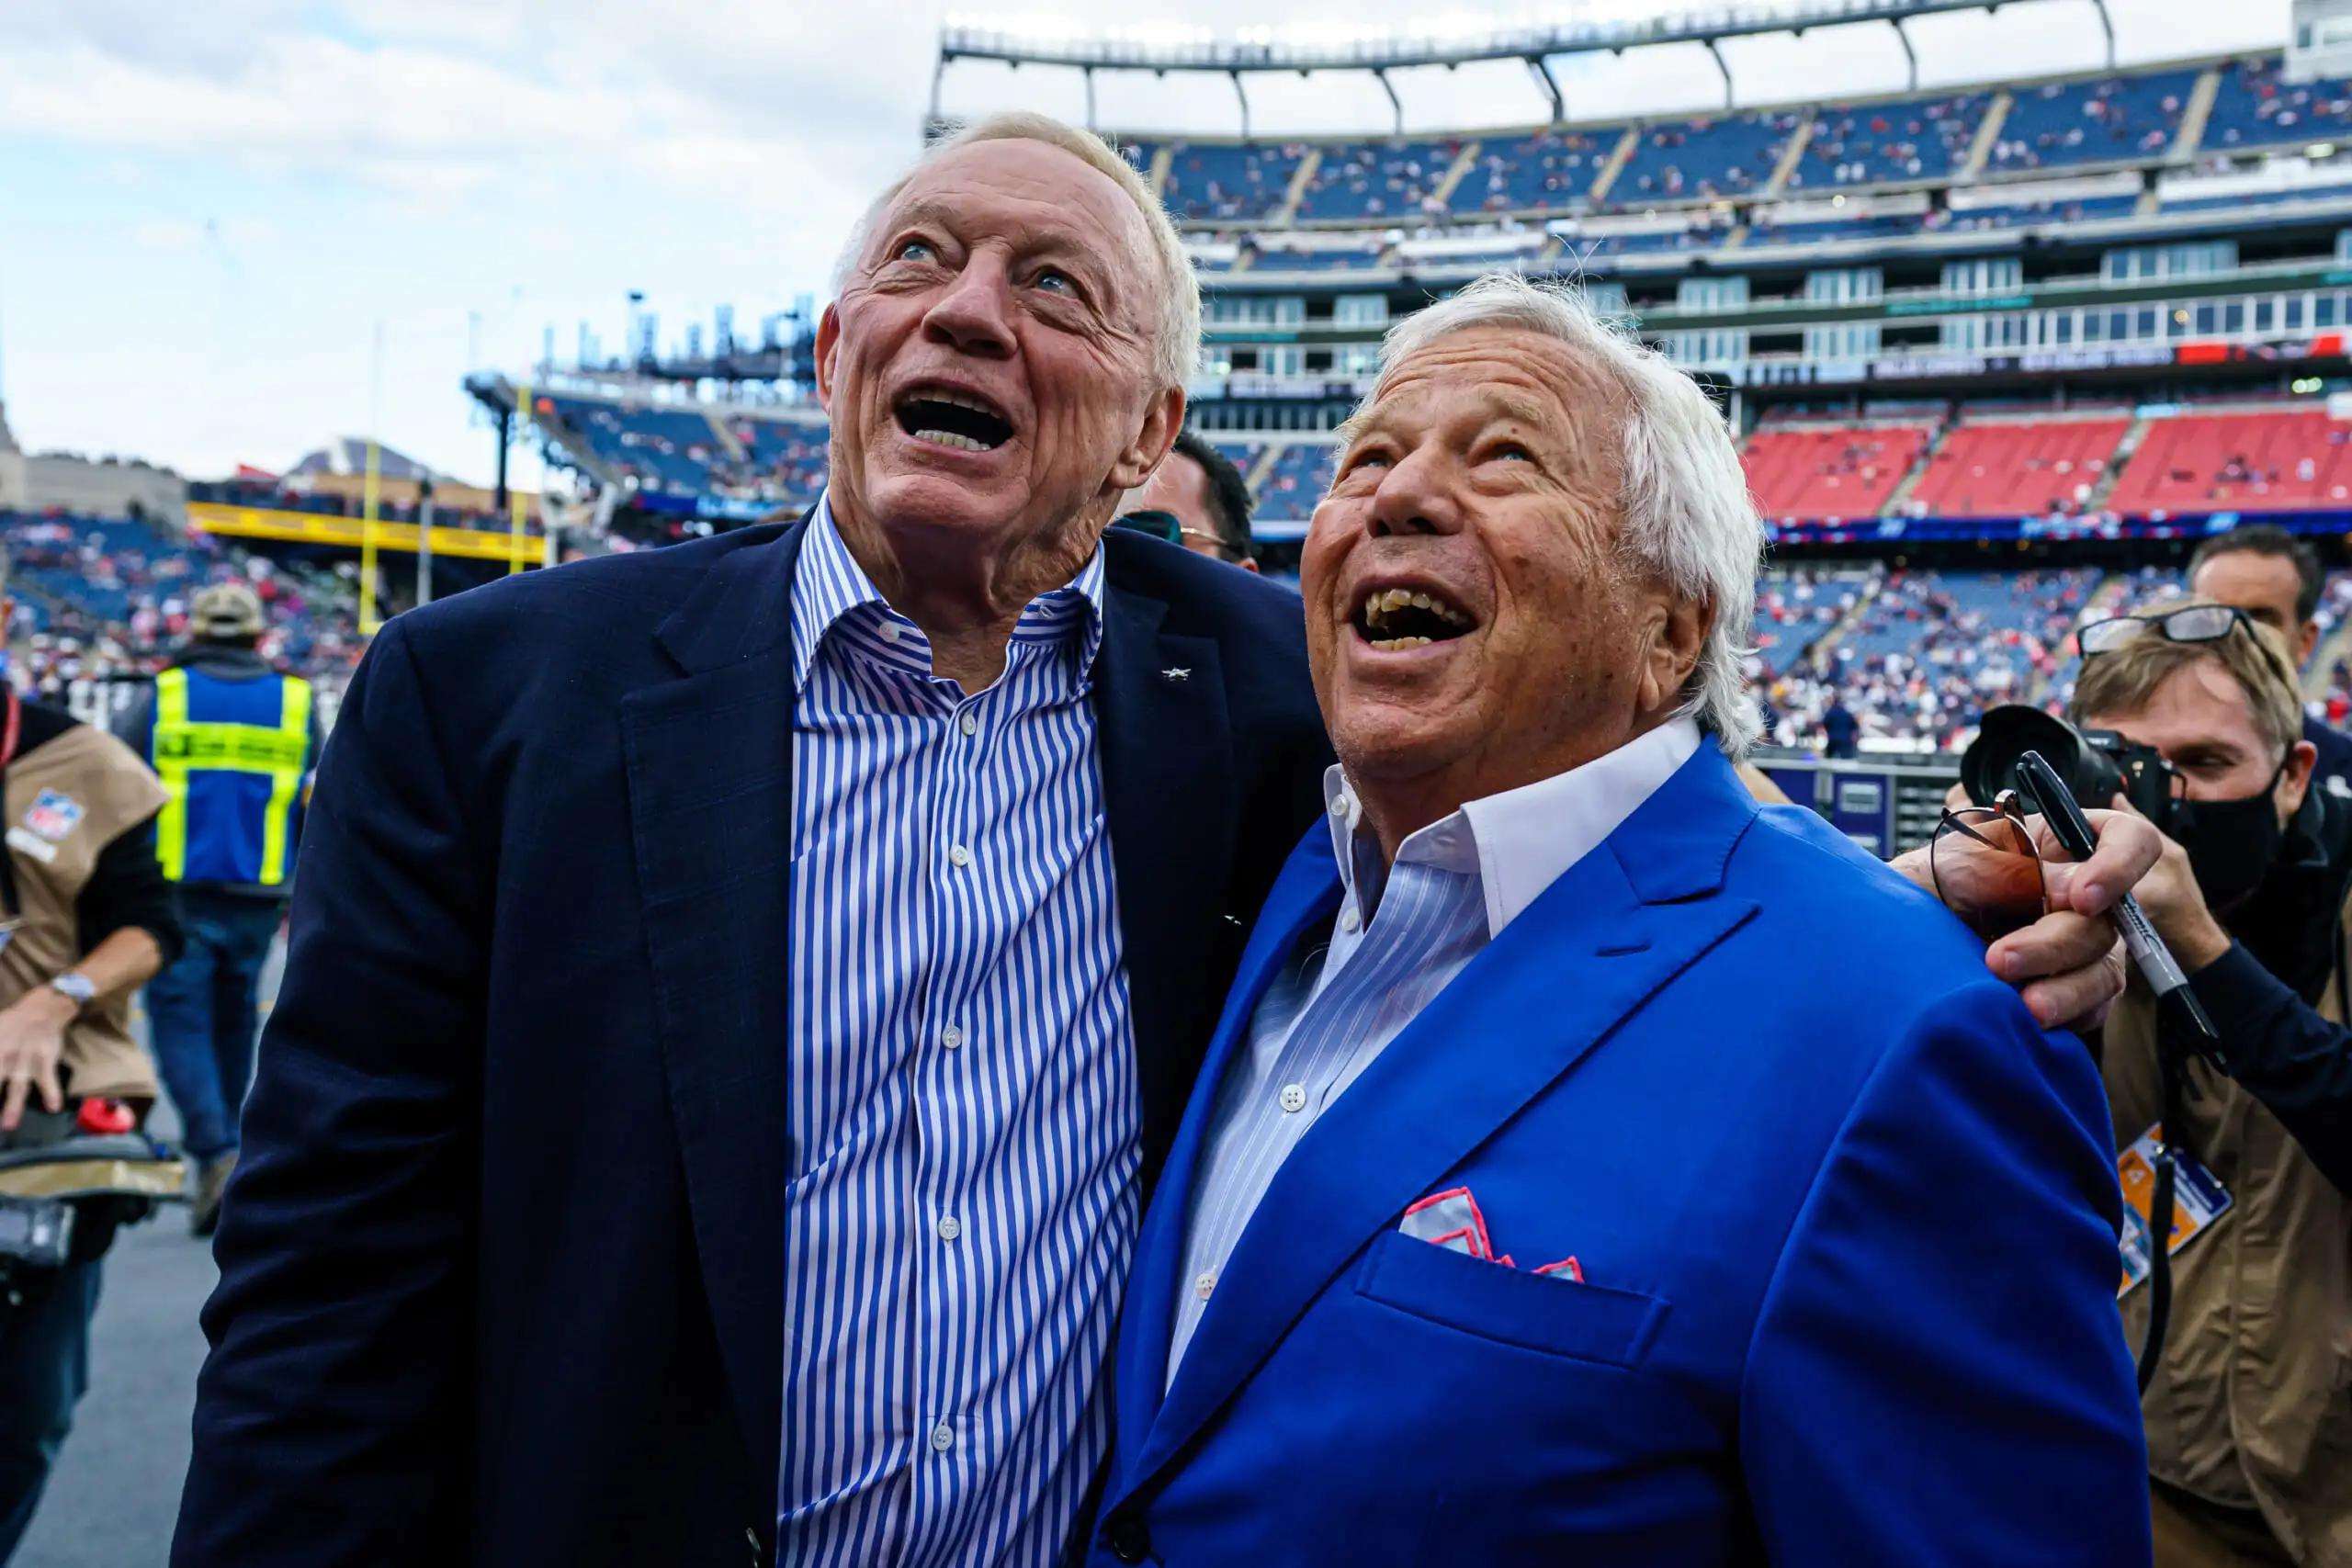 The Richest MLB Owners, Ranked by Net Worth